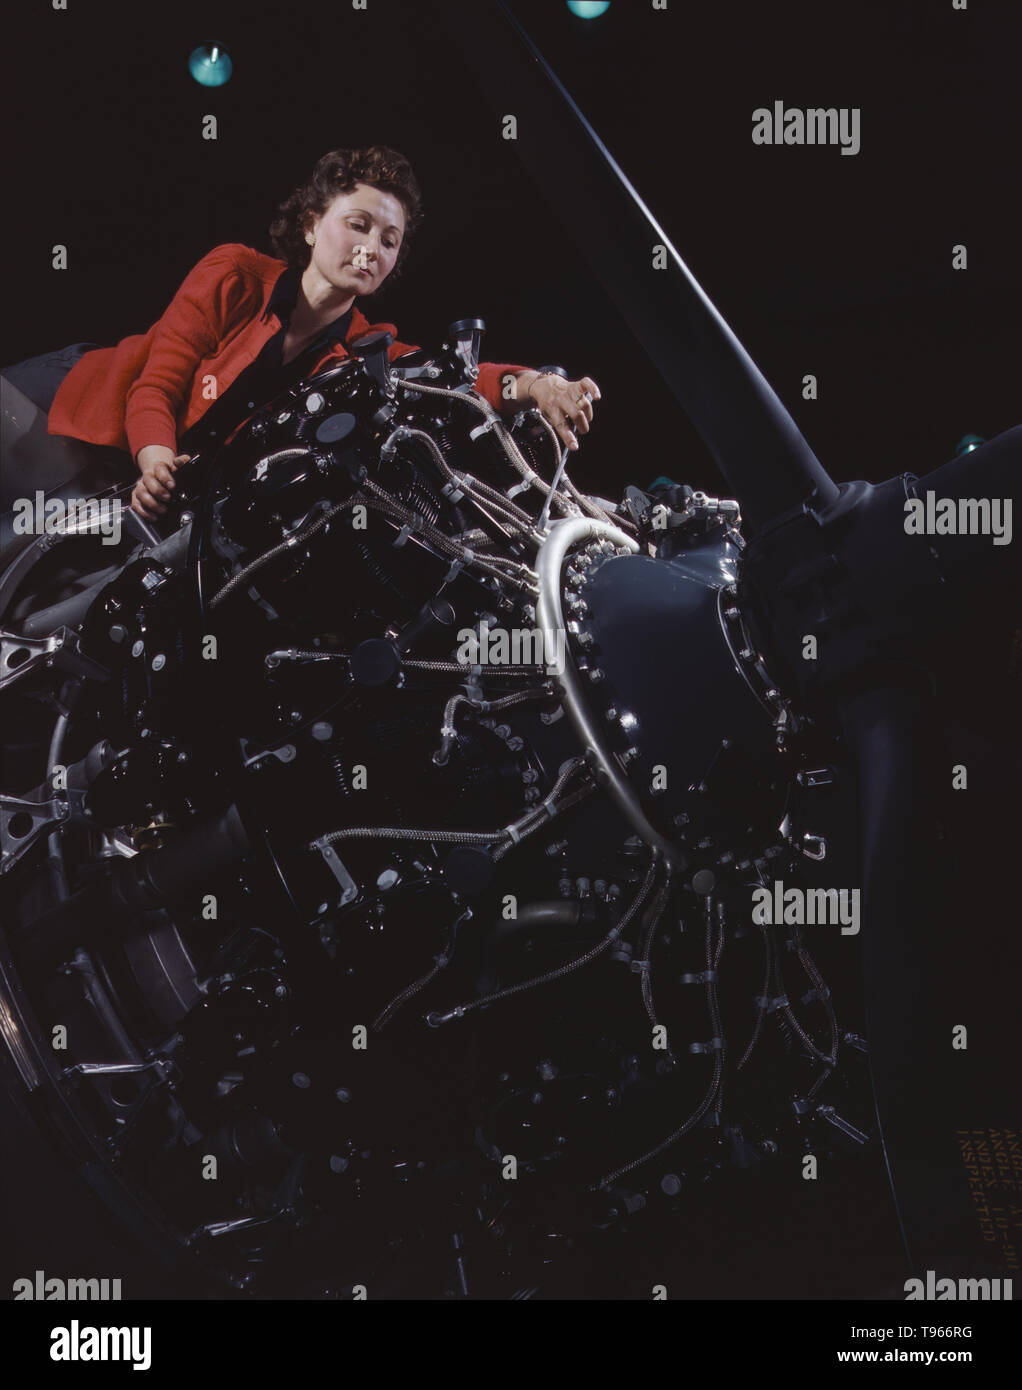 Woman at work on motor, Douglas Aircraft Company, Long Beach, California. Although the image of 'Rosie the Riveter' reflected the industrial work of welders and riveters, the majority of working women filled non-factory positions in every sector of the economy. What unified the experiences of these women was that they proved to themselves, and the country, that they could do a man's job and could do it well. Photographed by Alfred T. Palmer, 1942. Stock Photo